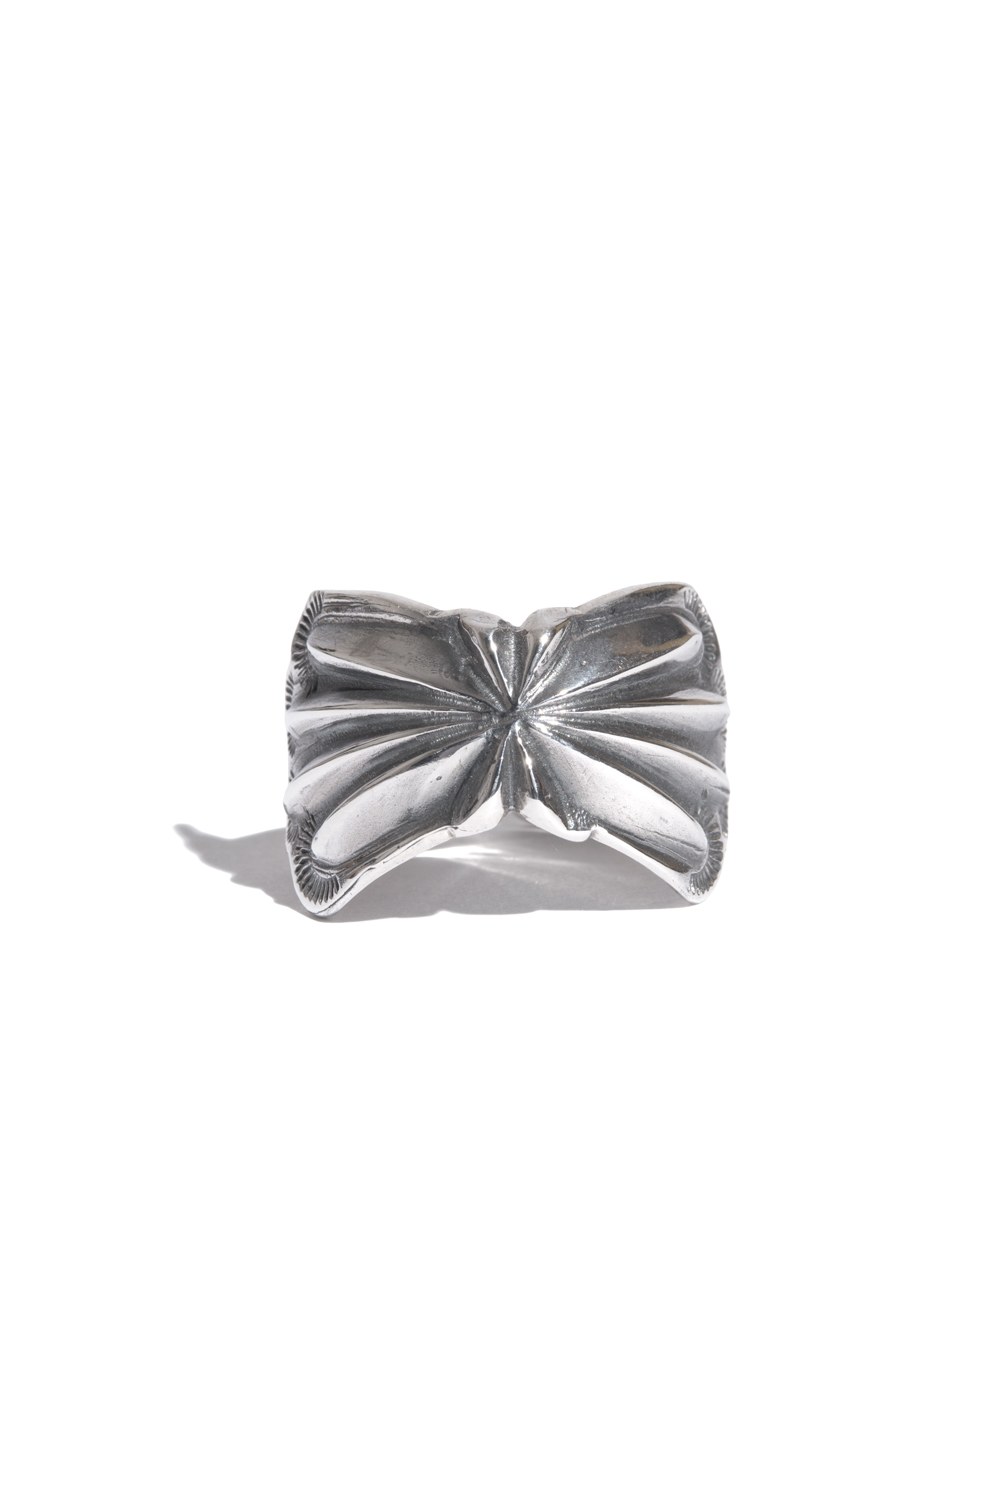 Larry Smith Scarf Ring